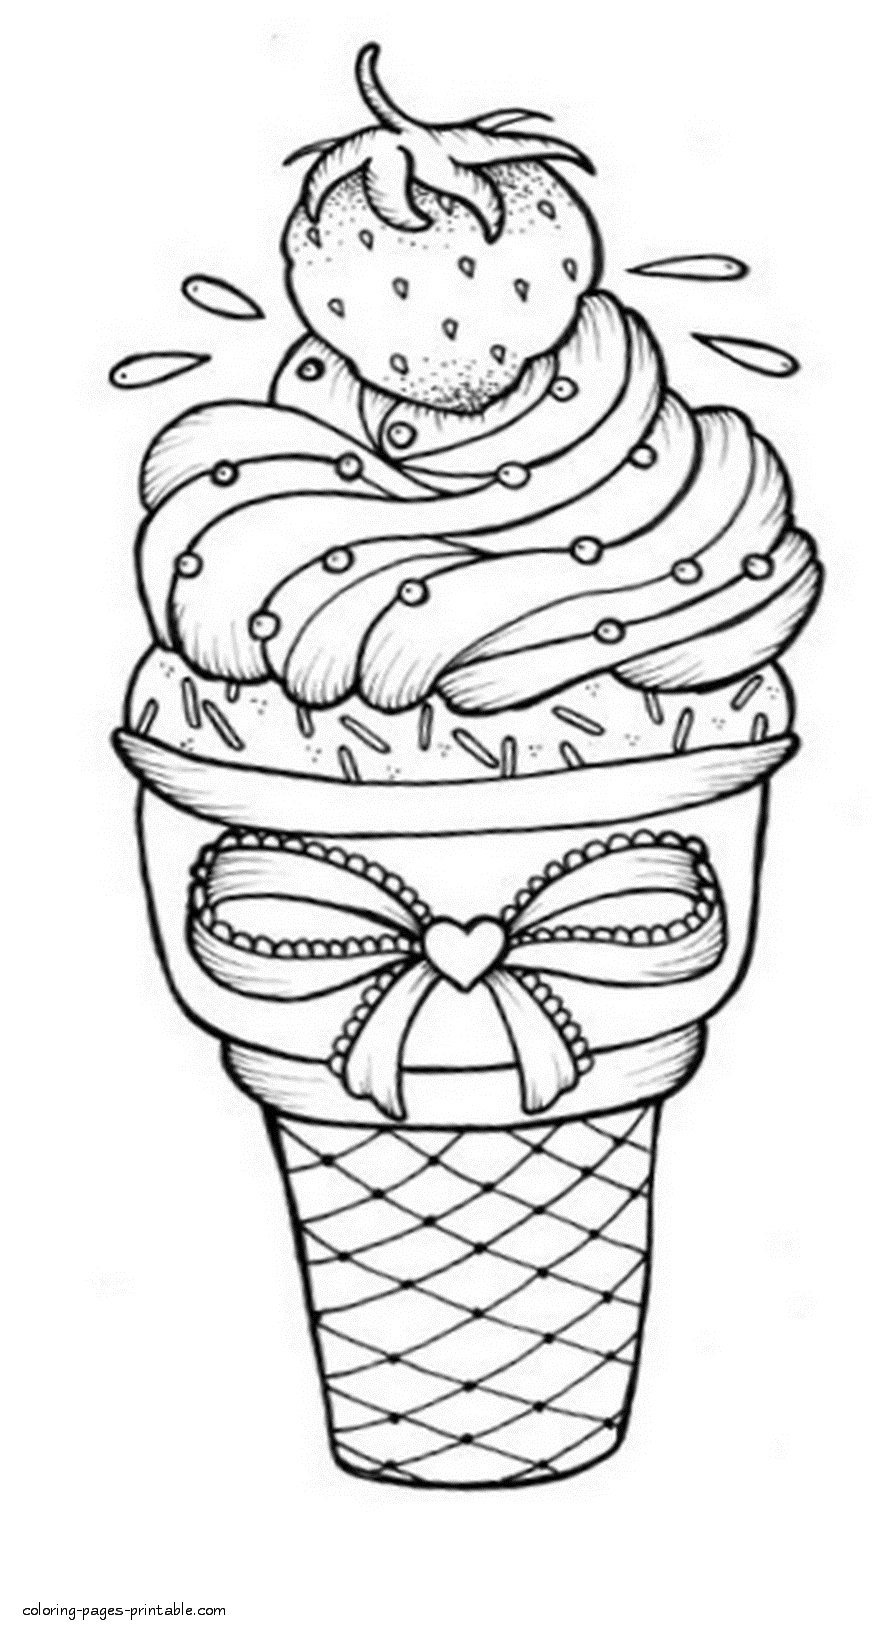 Coloring pages of ice cream